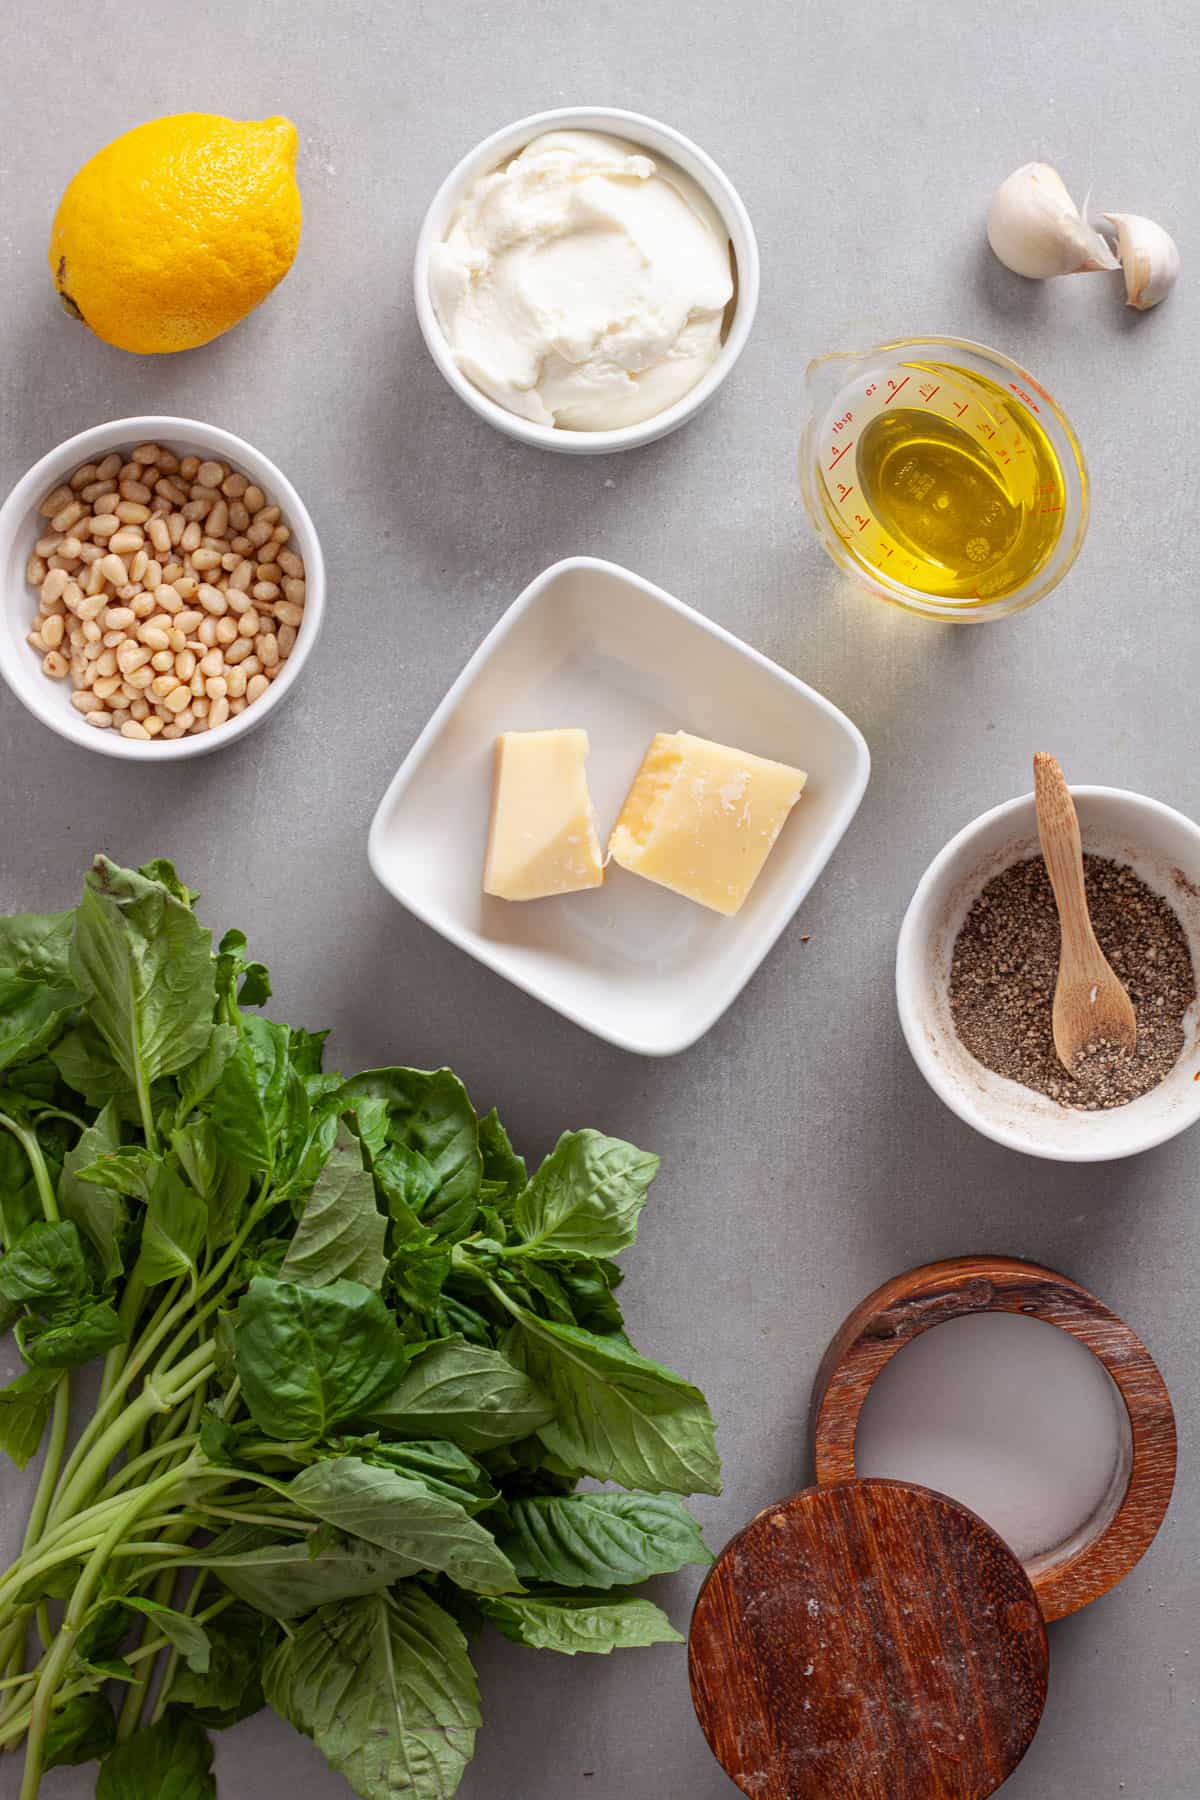 Ingredients for ricotta pesto pasta on a gray table.